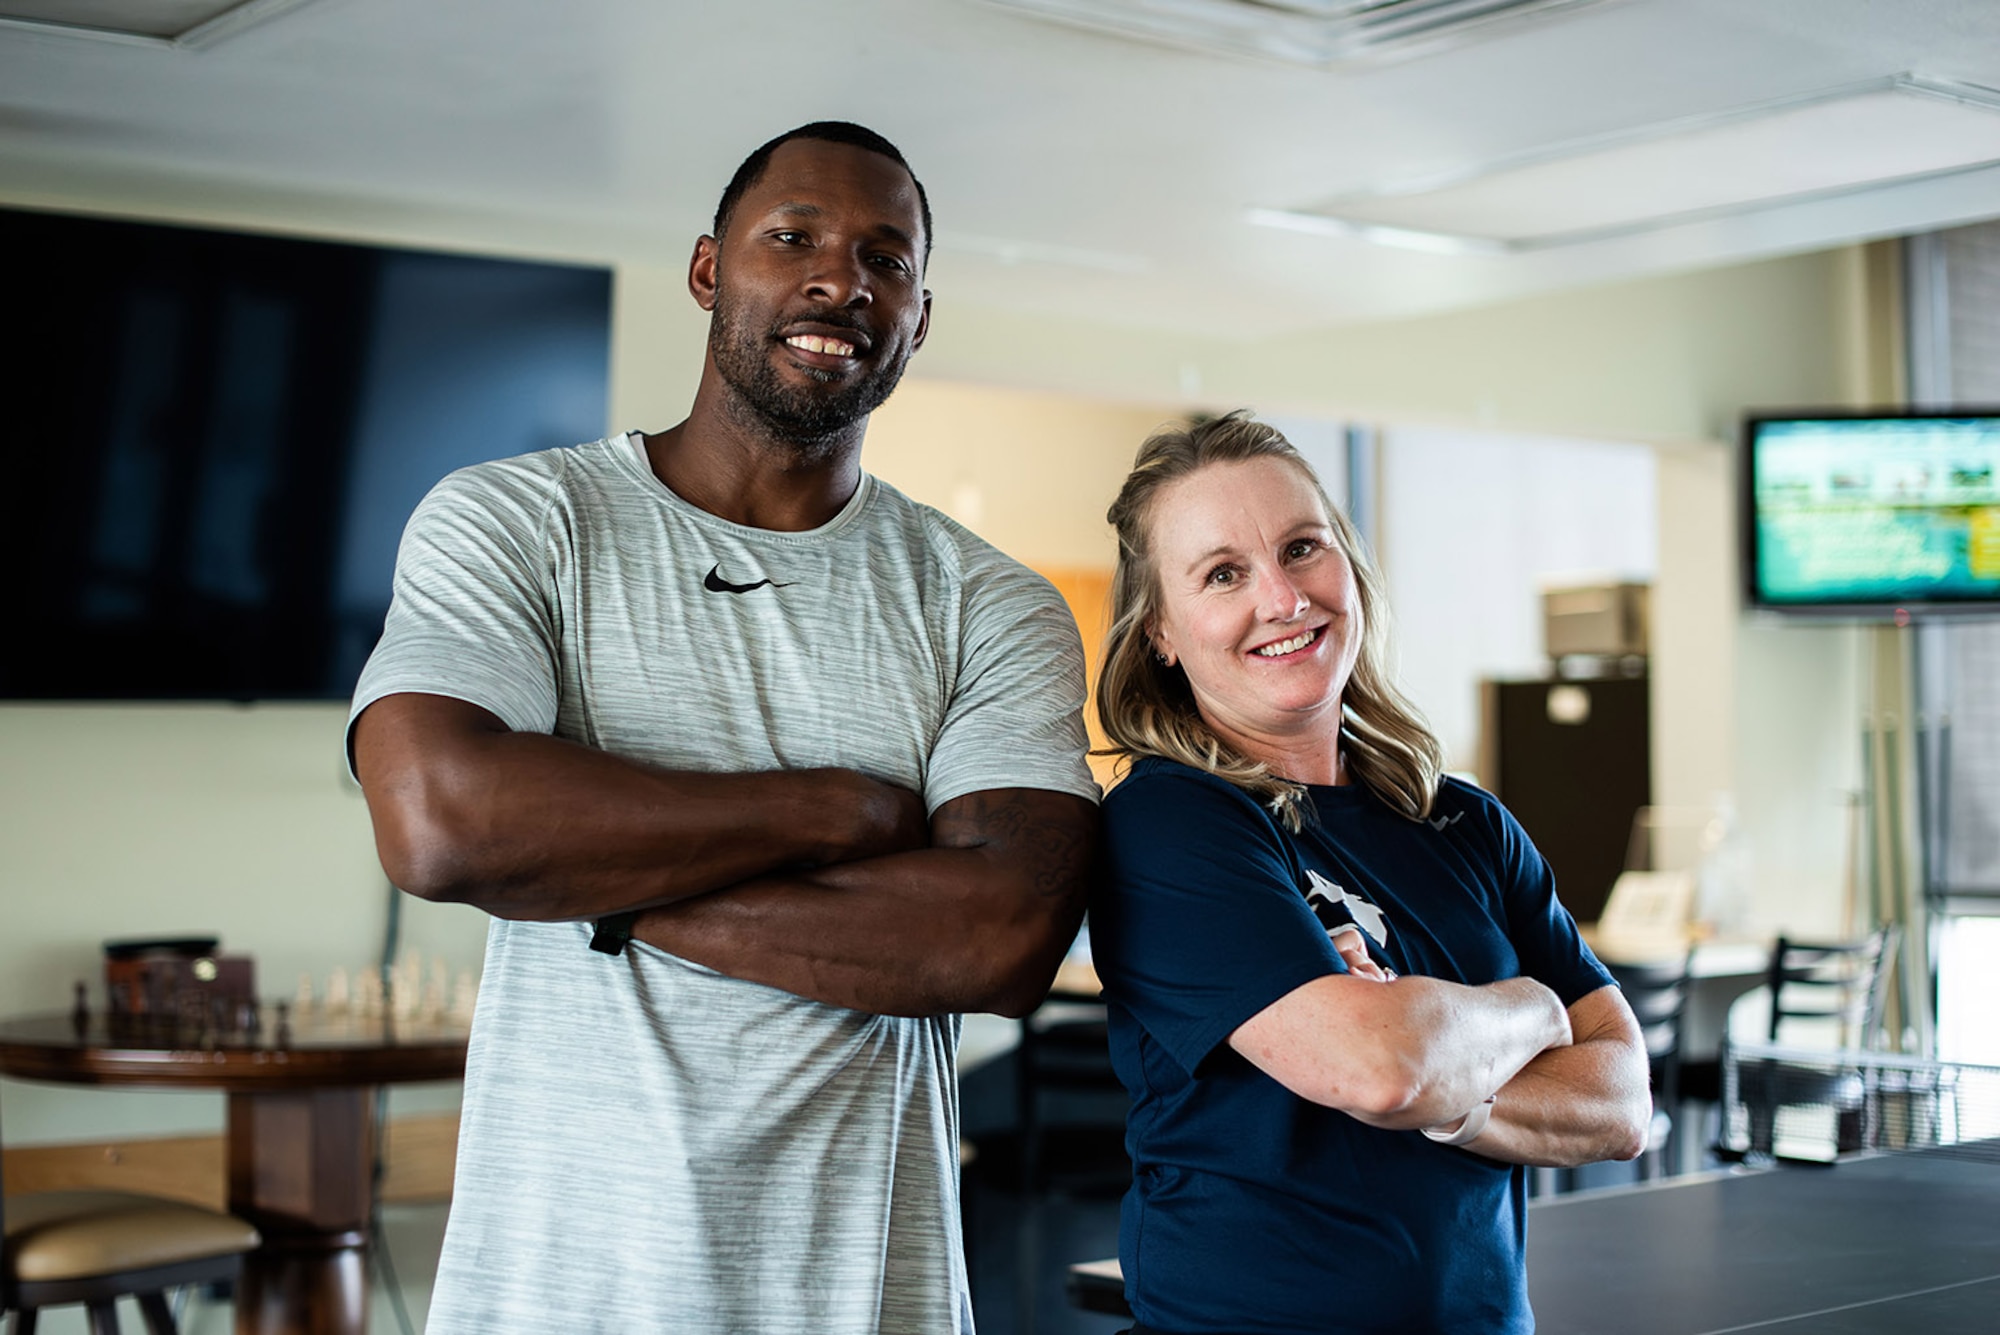 Brandon Waller, 10th Medical Group Health Promotion coordinator, and Erin Locke, 10th Medical Group registered dietitian